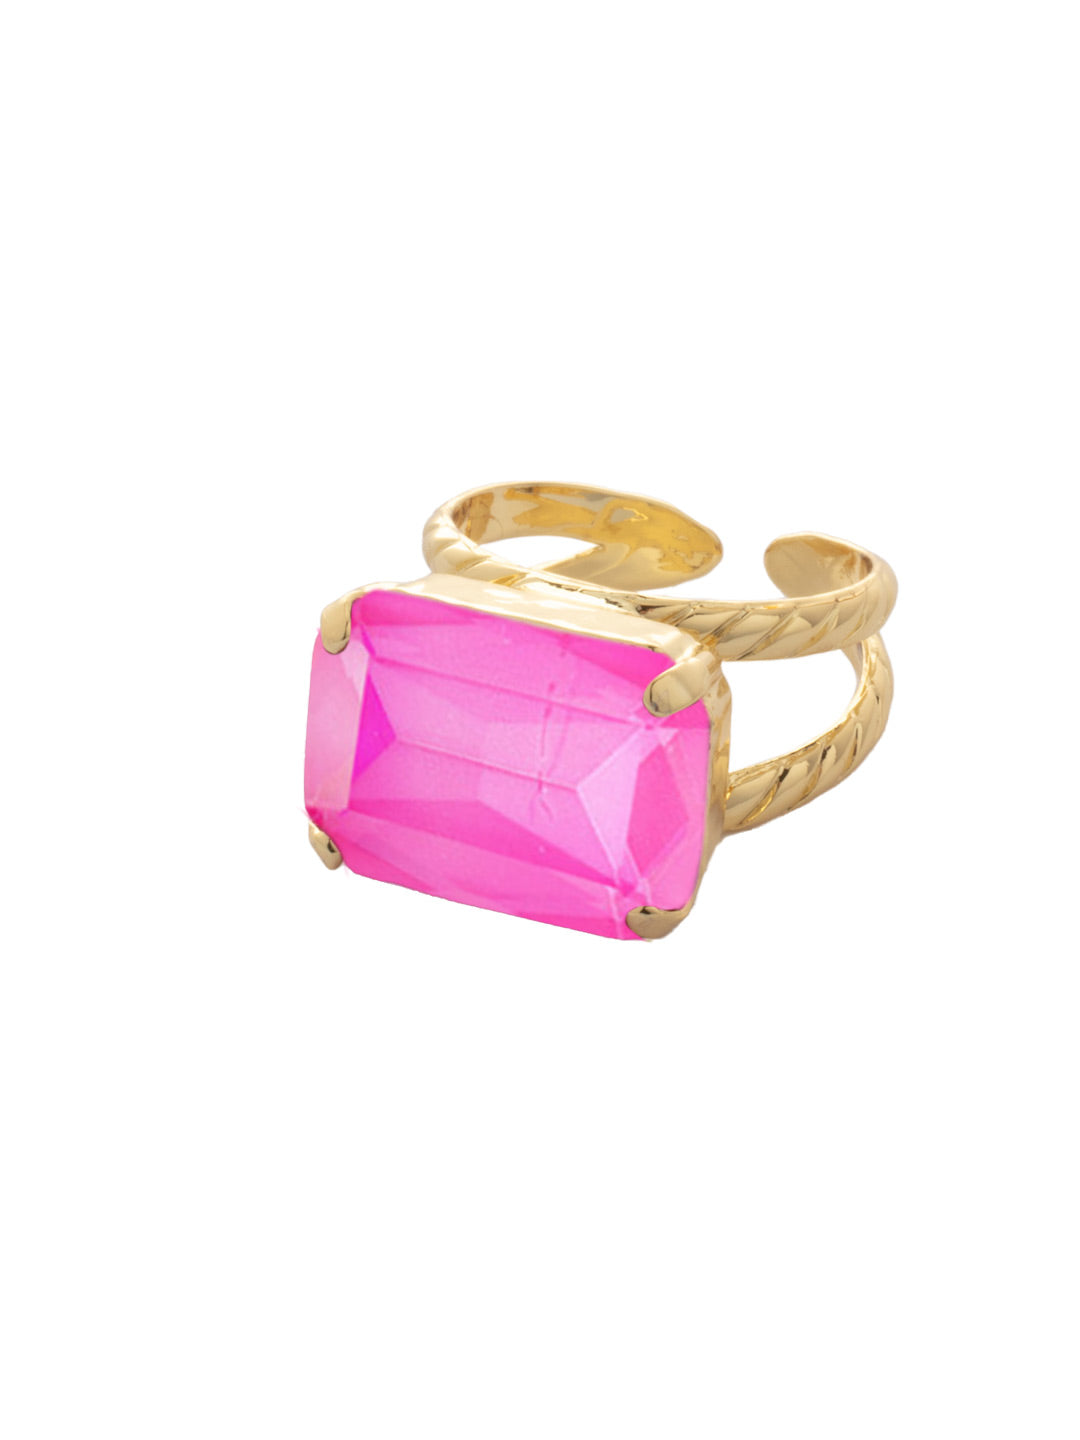 Emerald Cocktail Ring - RFL88BGETP - <p>The Emerald Cocktail Ring features a single emerald cut crystal on an adjustable ring band. From Sorrelli's Electric Pink collection in our Bright Gold-tone finish.</p>